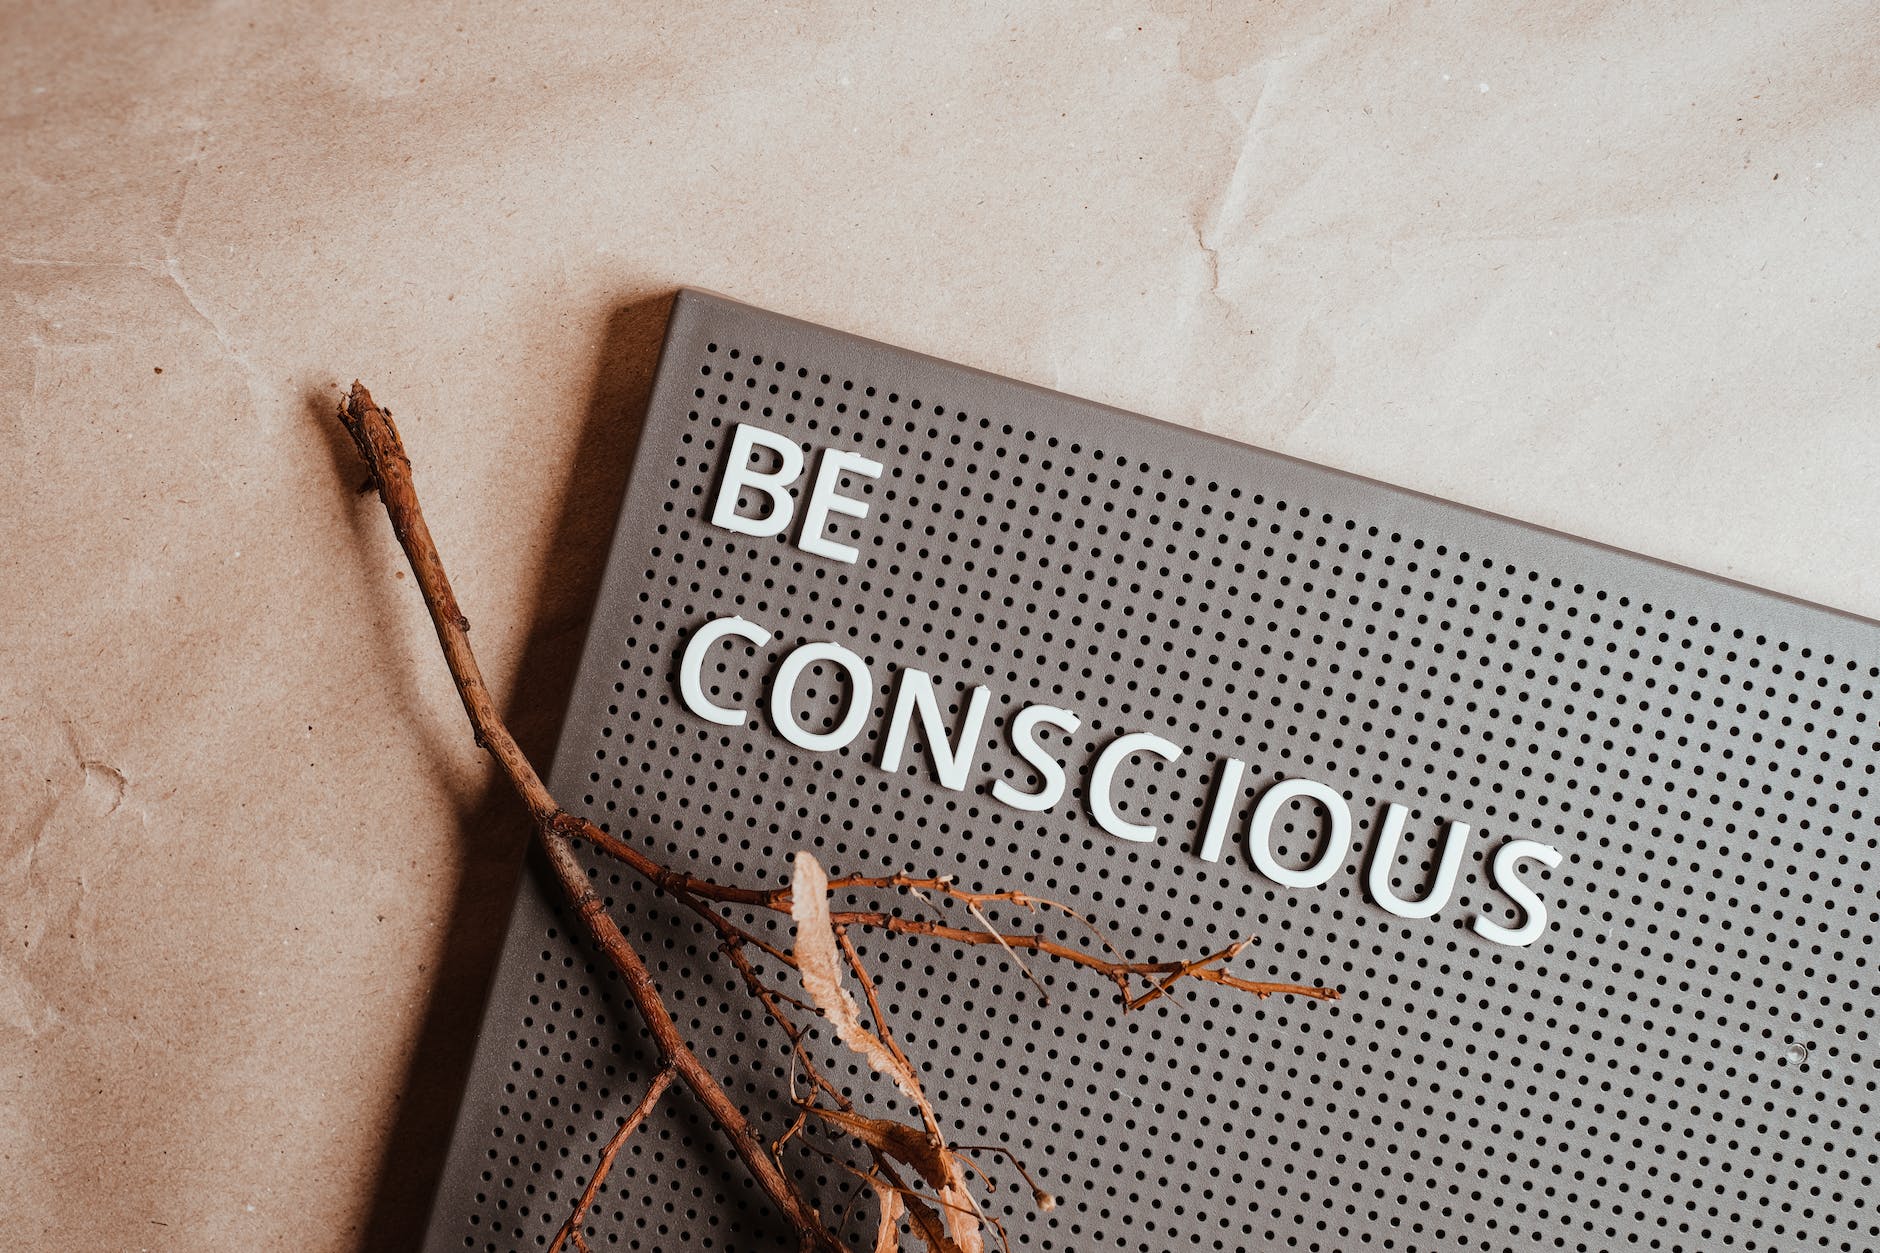 the phrase be conscious on a pin board